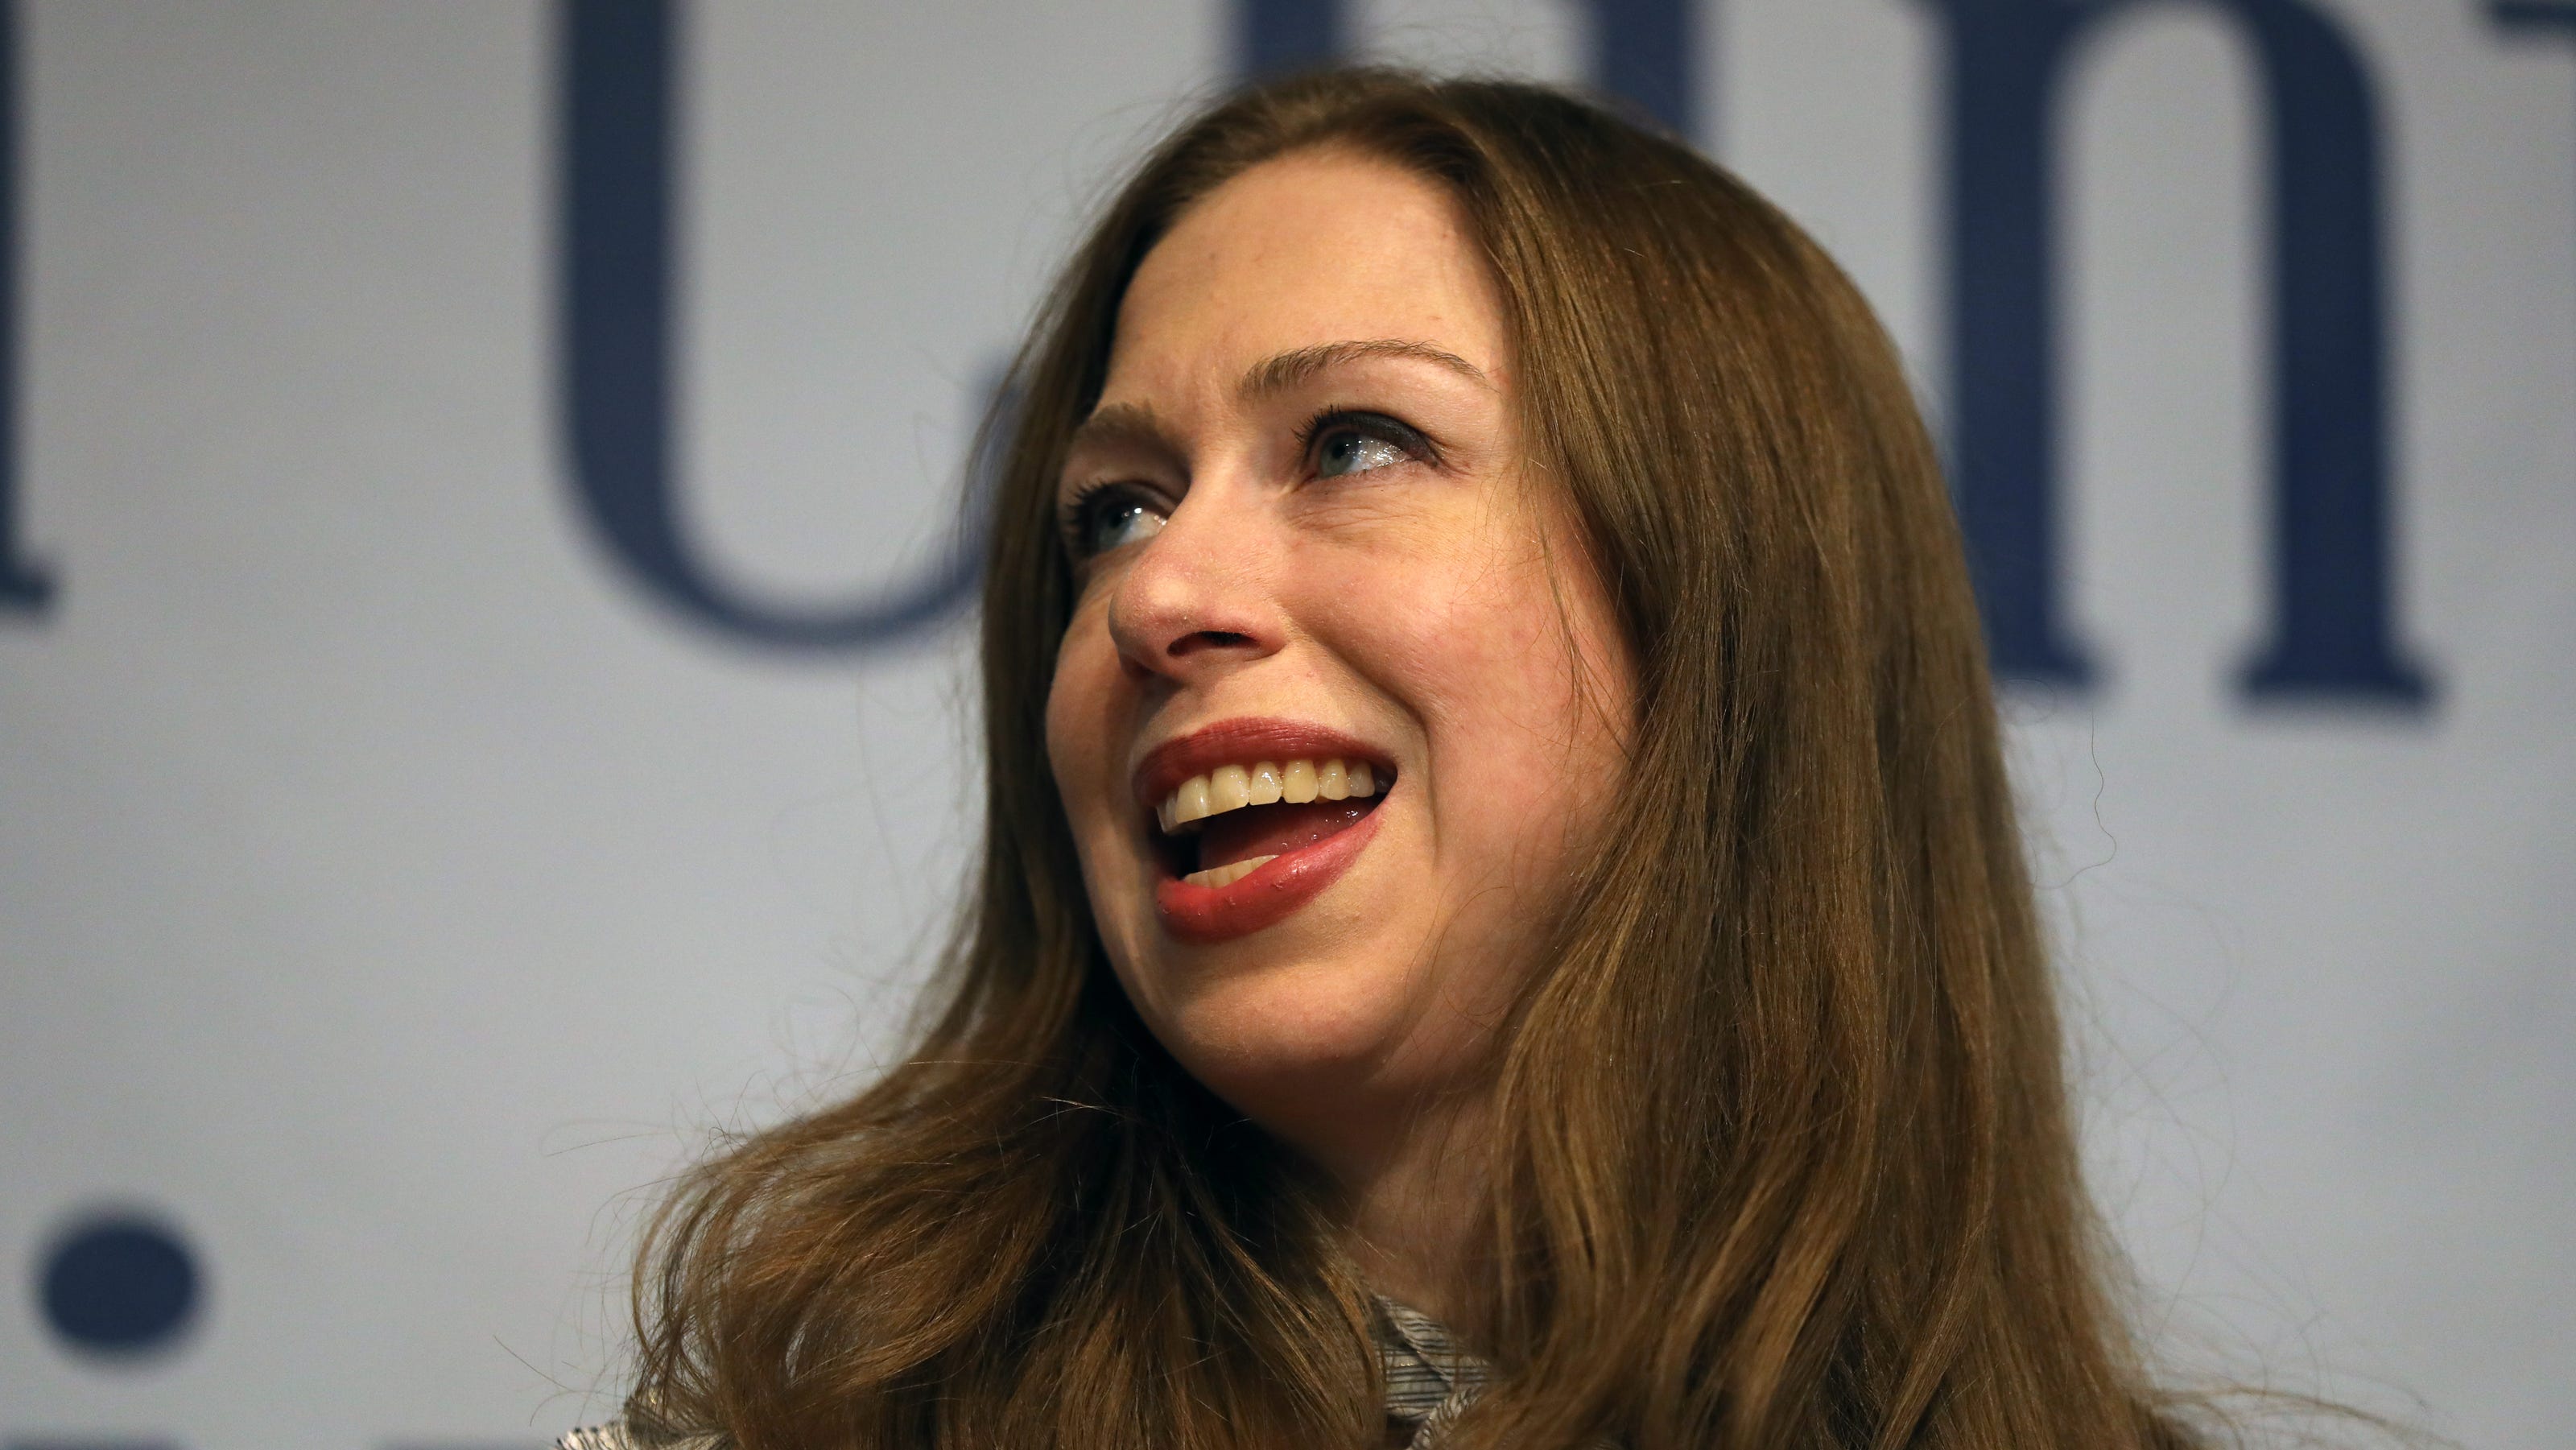 chelsea-clinton-was-busy-pumping-the-night-hilary-clinton-lost